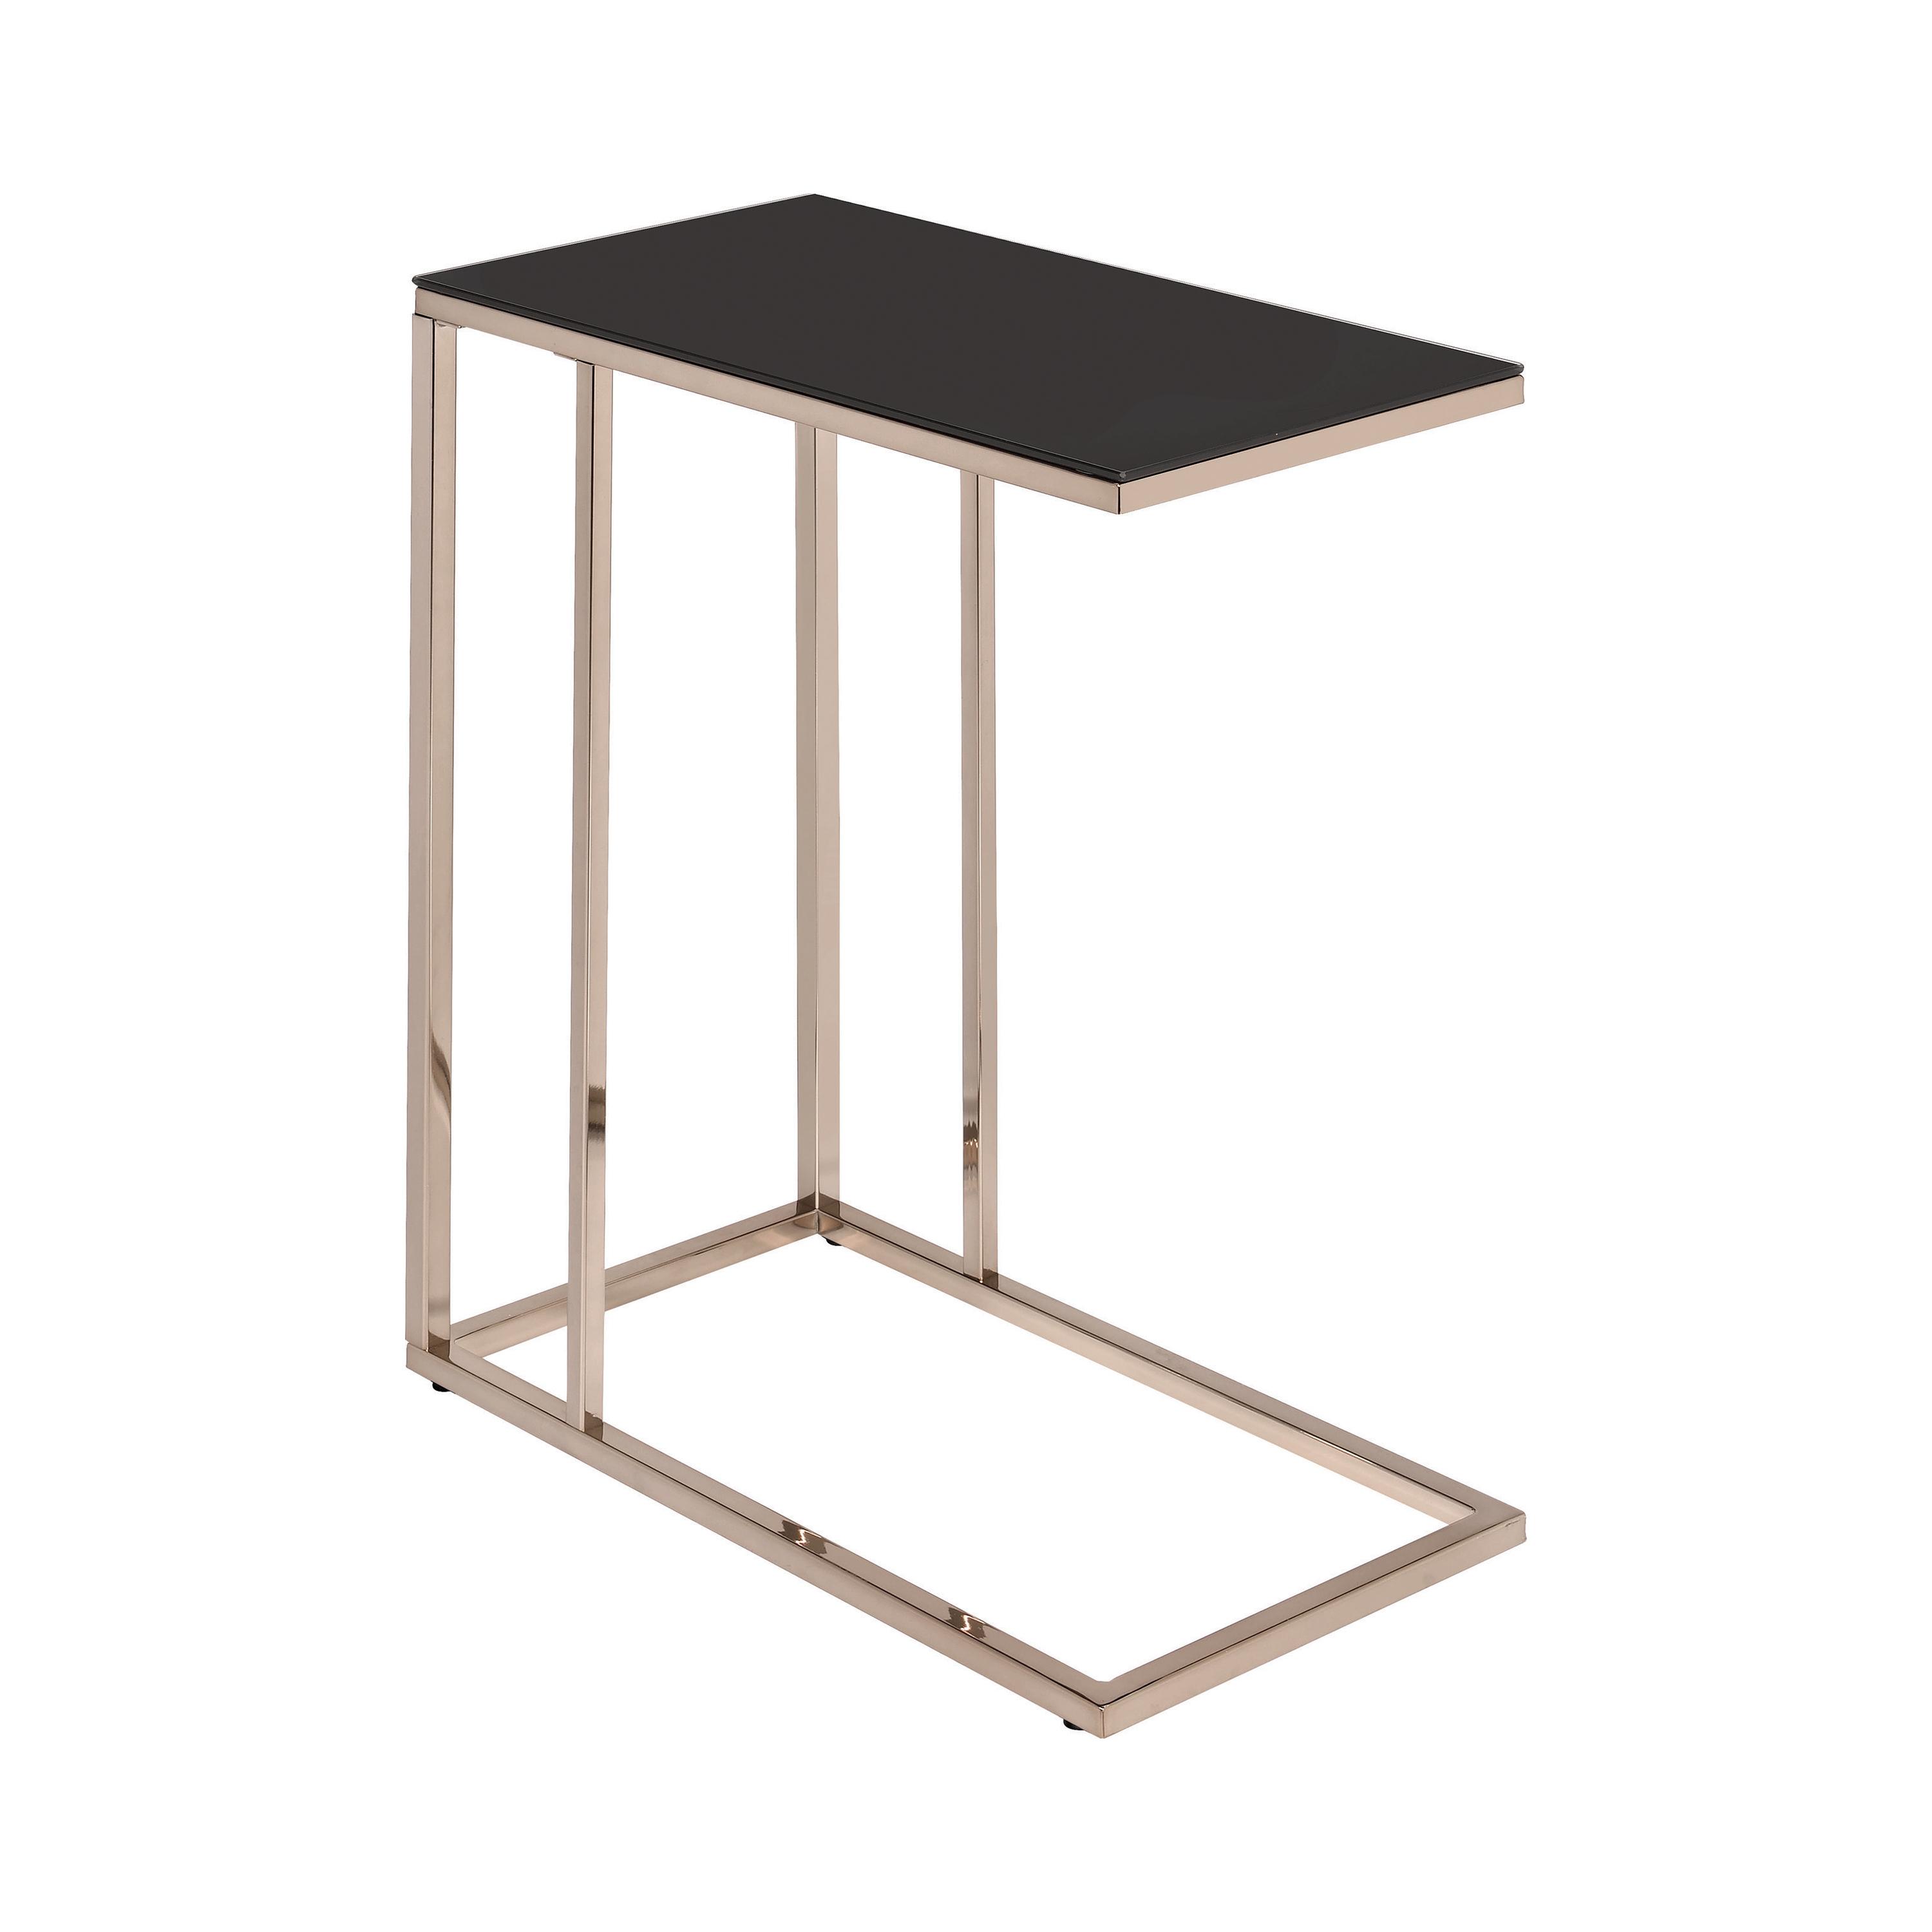 Contemporary Accent Table 902928 902928 in Black 